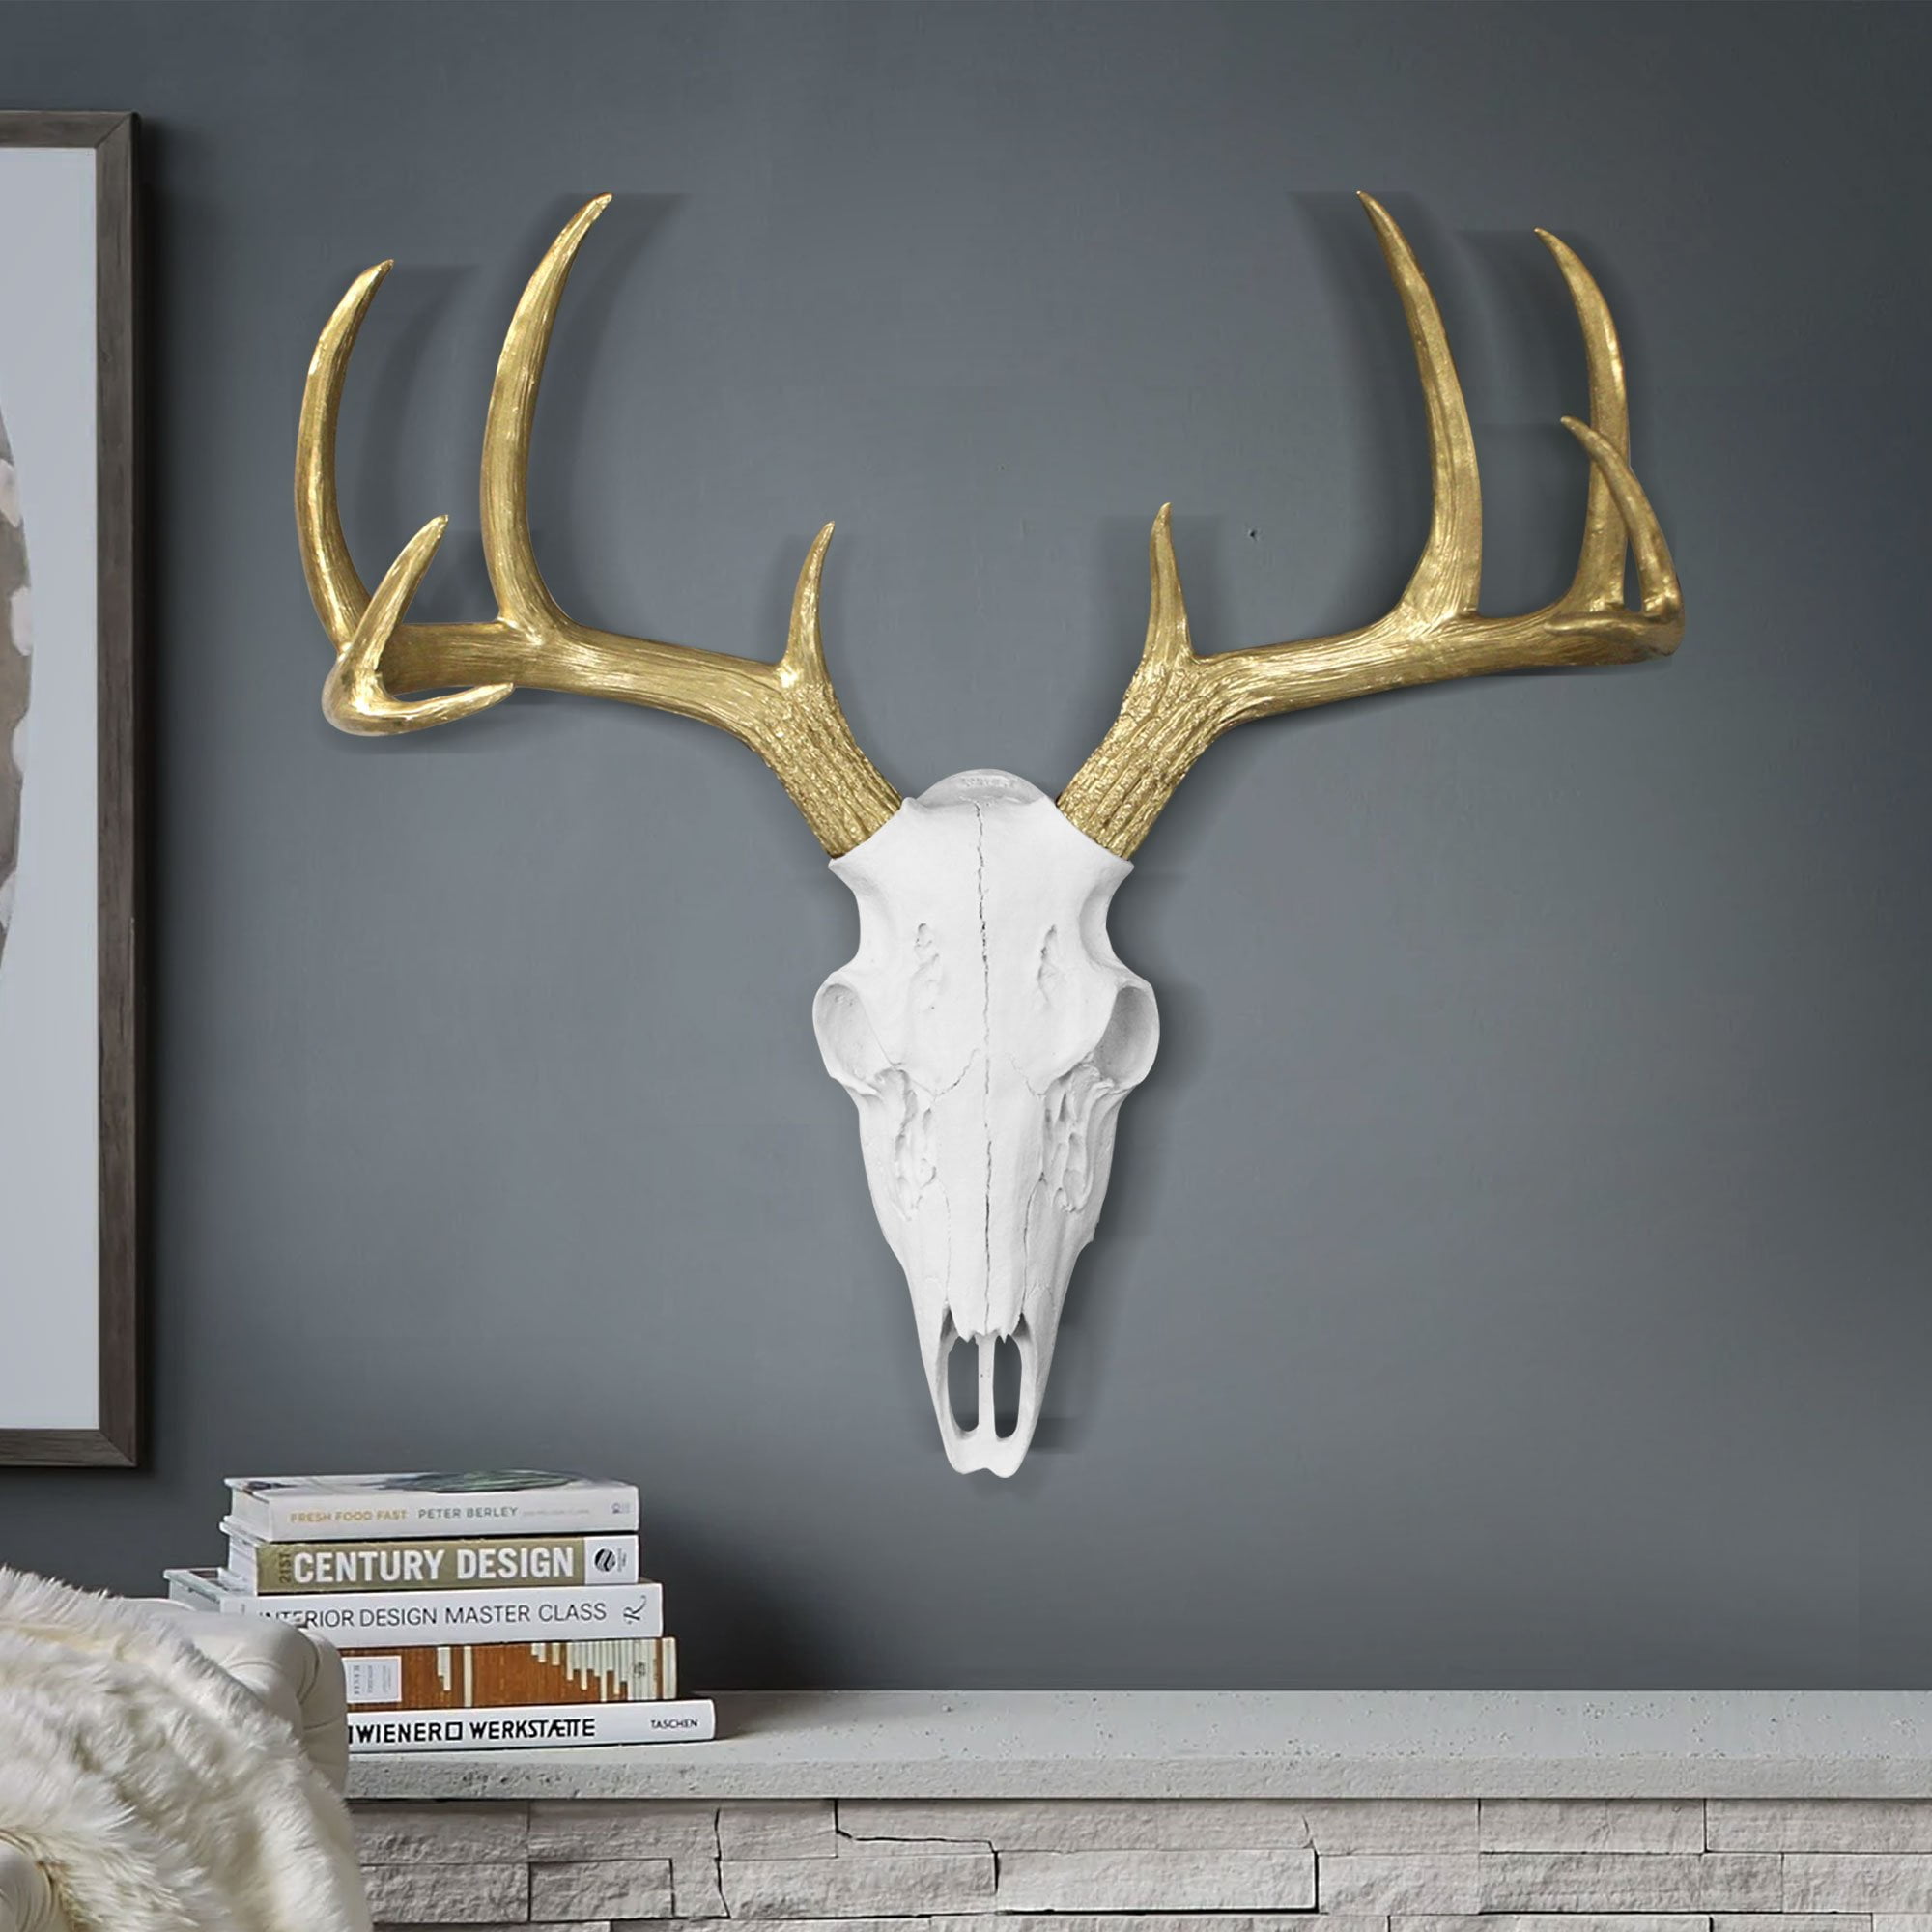 Buy Wall Charmers Large White Gold Antler Faux Deer Skull Decor - 21 inch  Faux Taxidermy Animal Head Wall Decor - Handmade Farmhouse Decor Online at  Lowest Price in Ubuy Nepal. 842944568